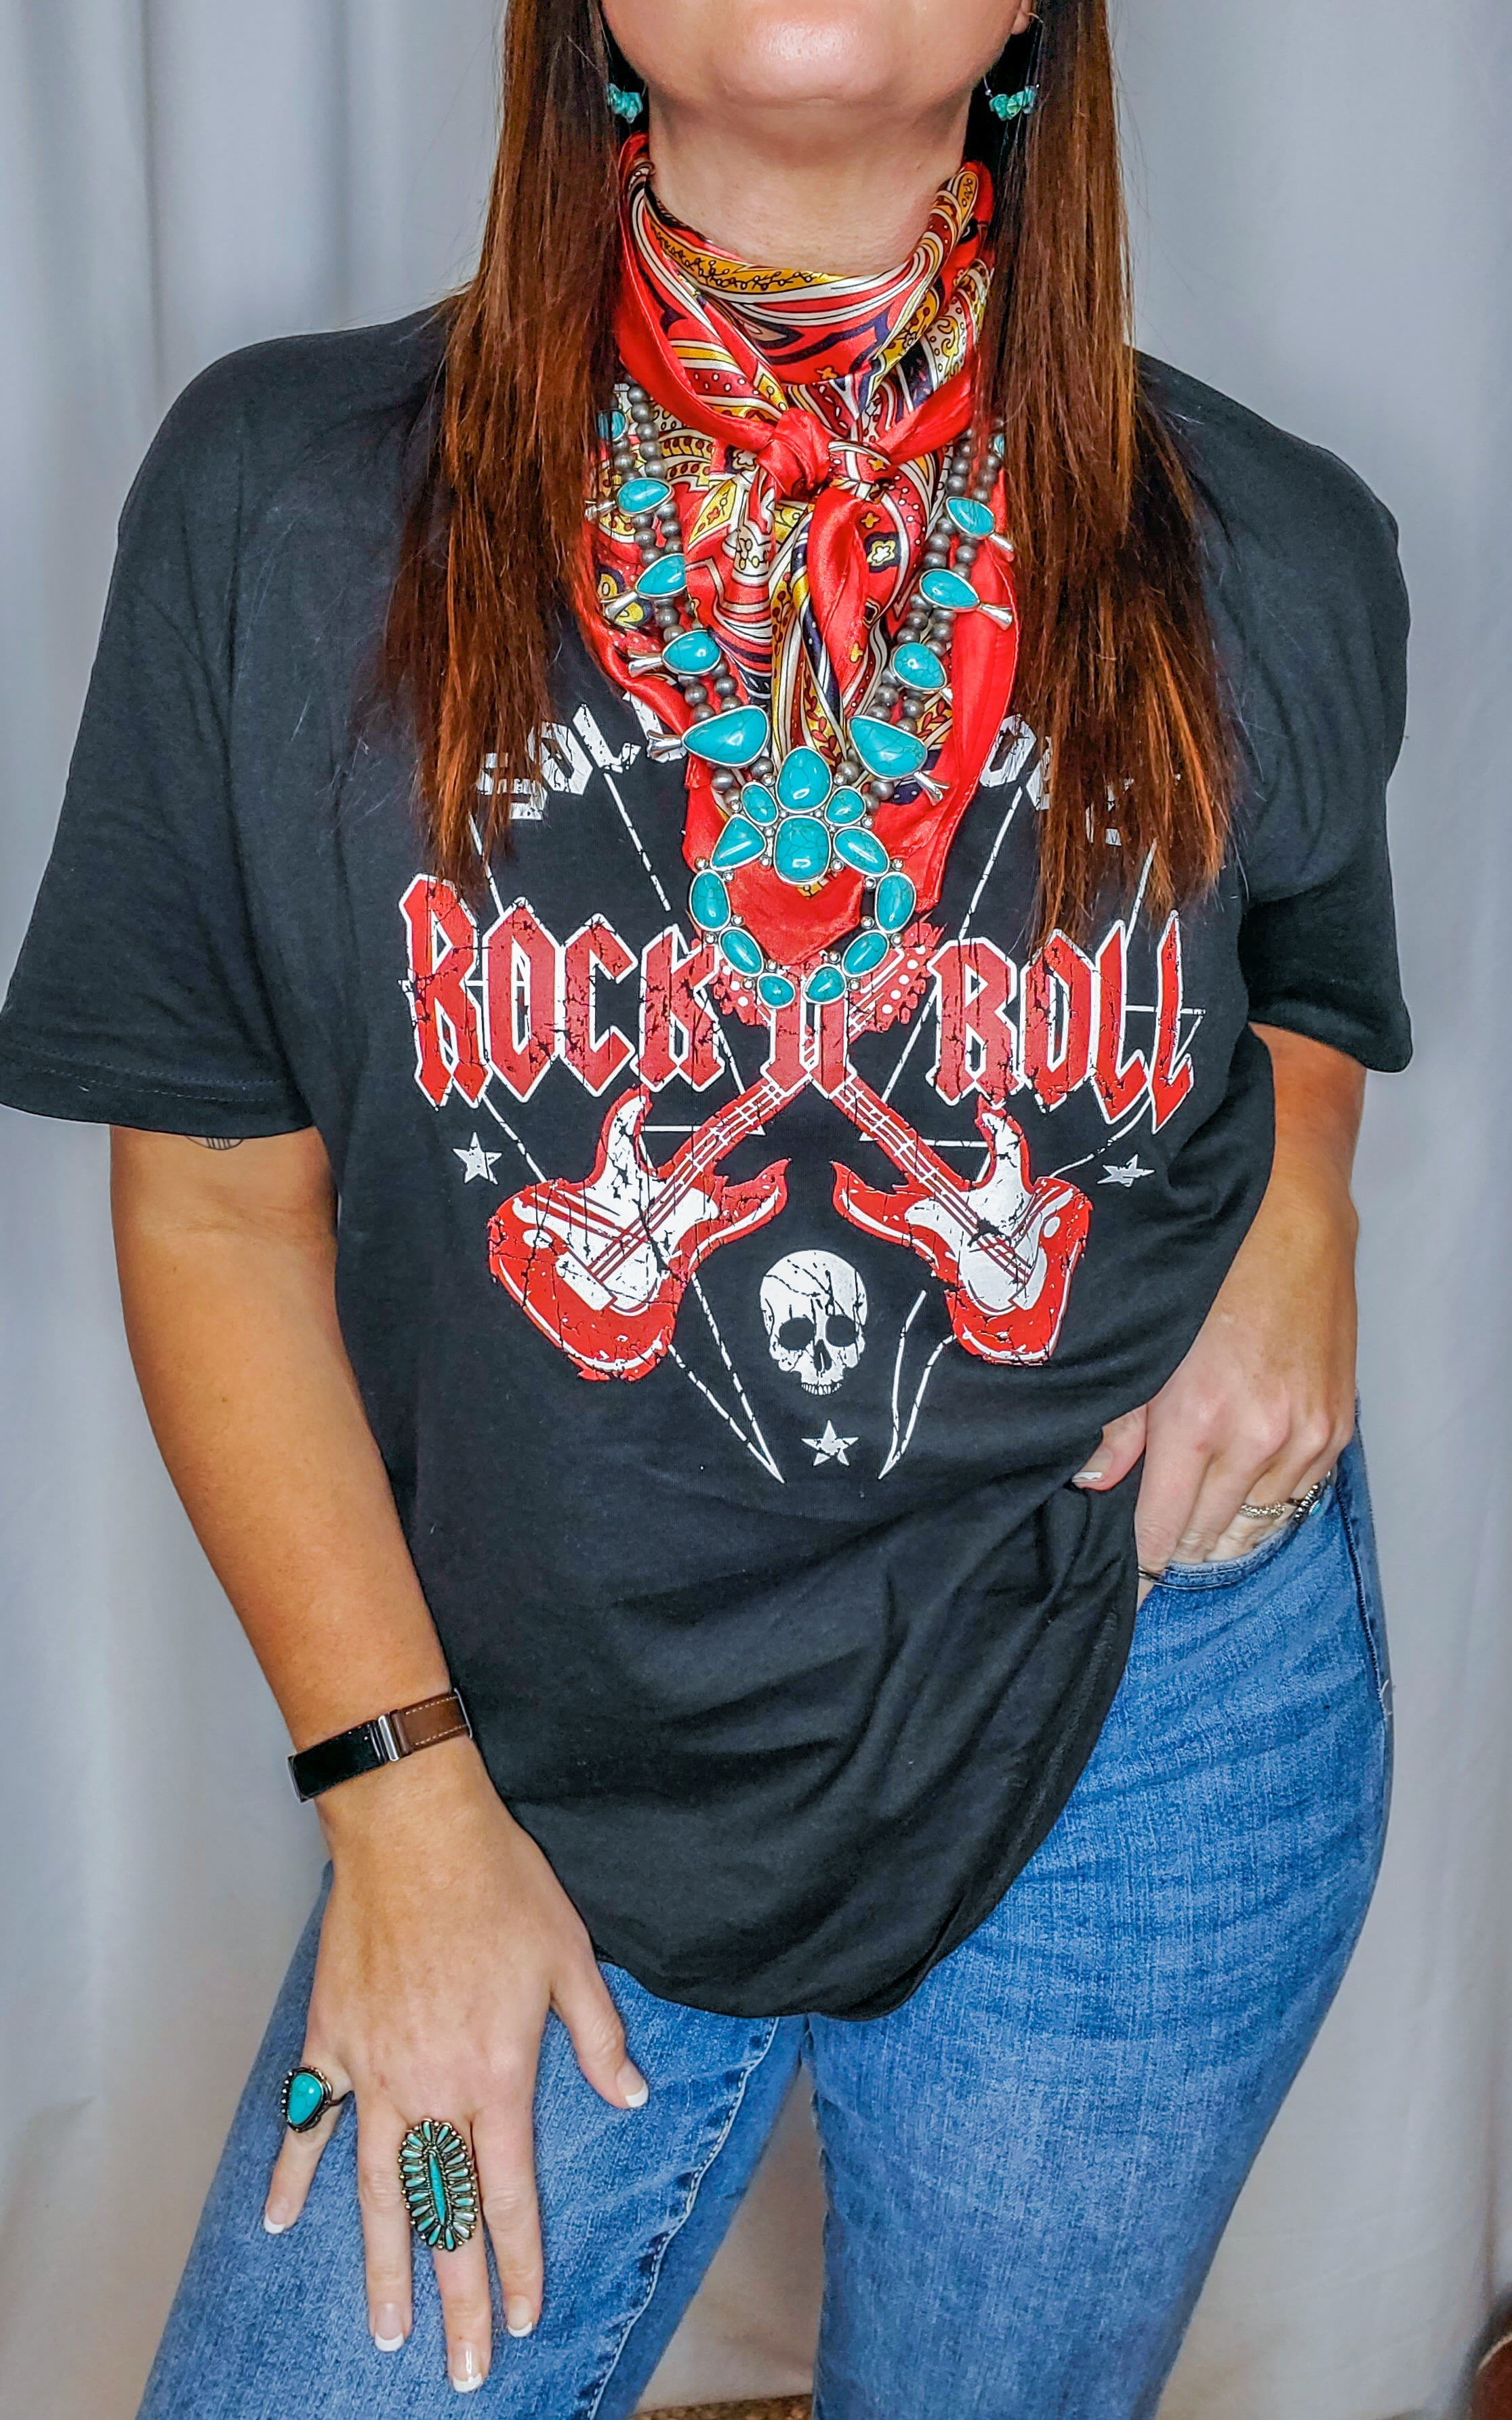 Sold My Soul To Rock N Roll Tee